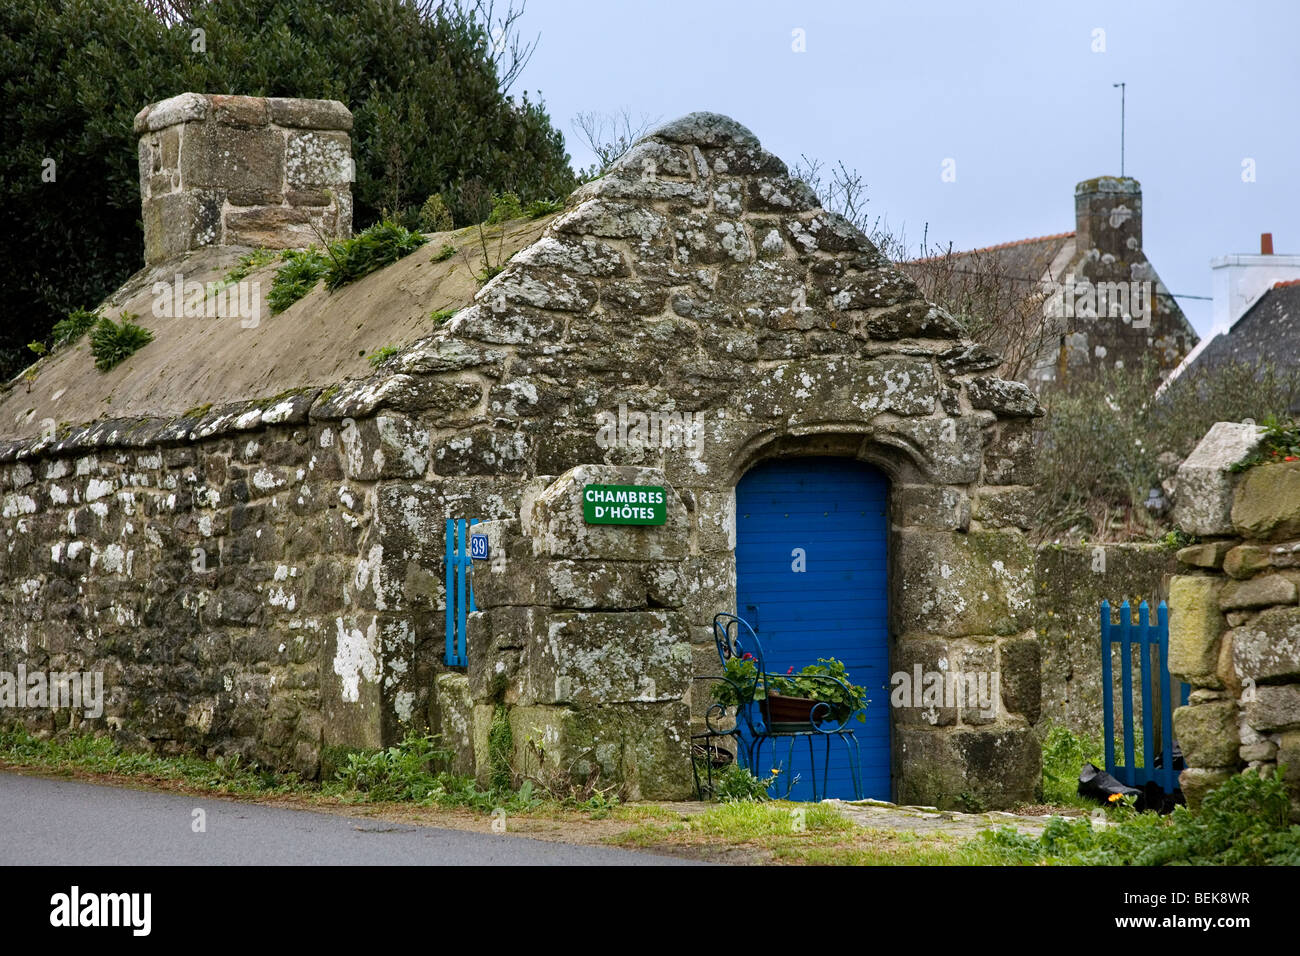 Gite de France in traditional building style, Brittany, France Stock Photo